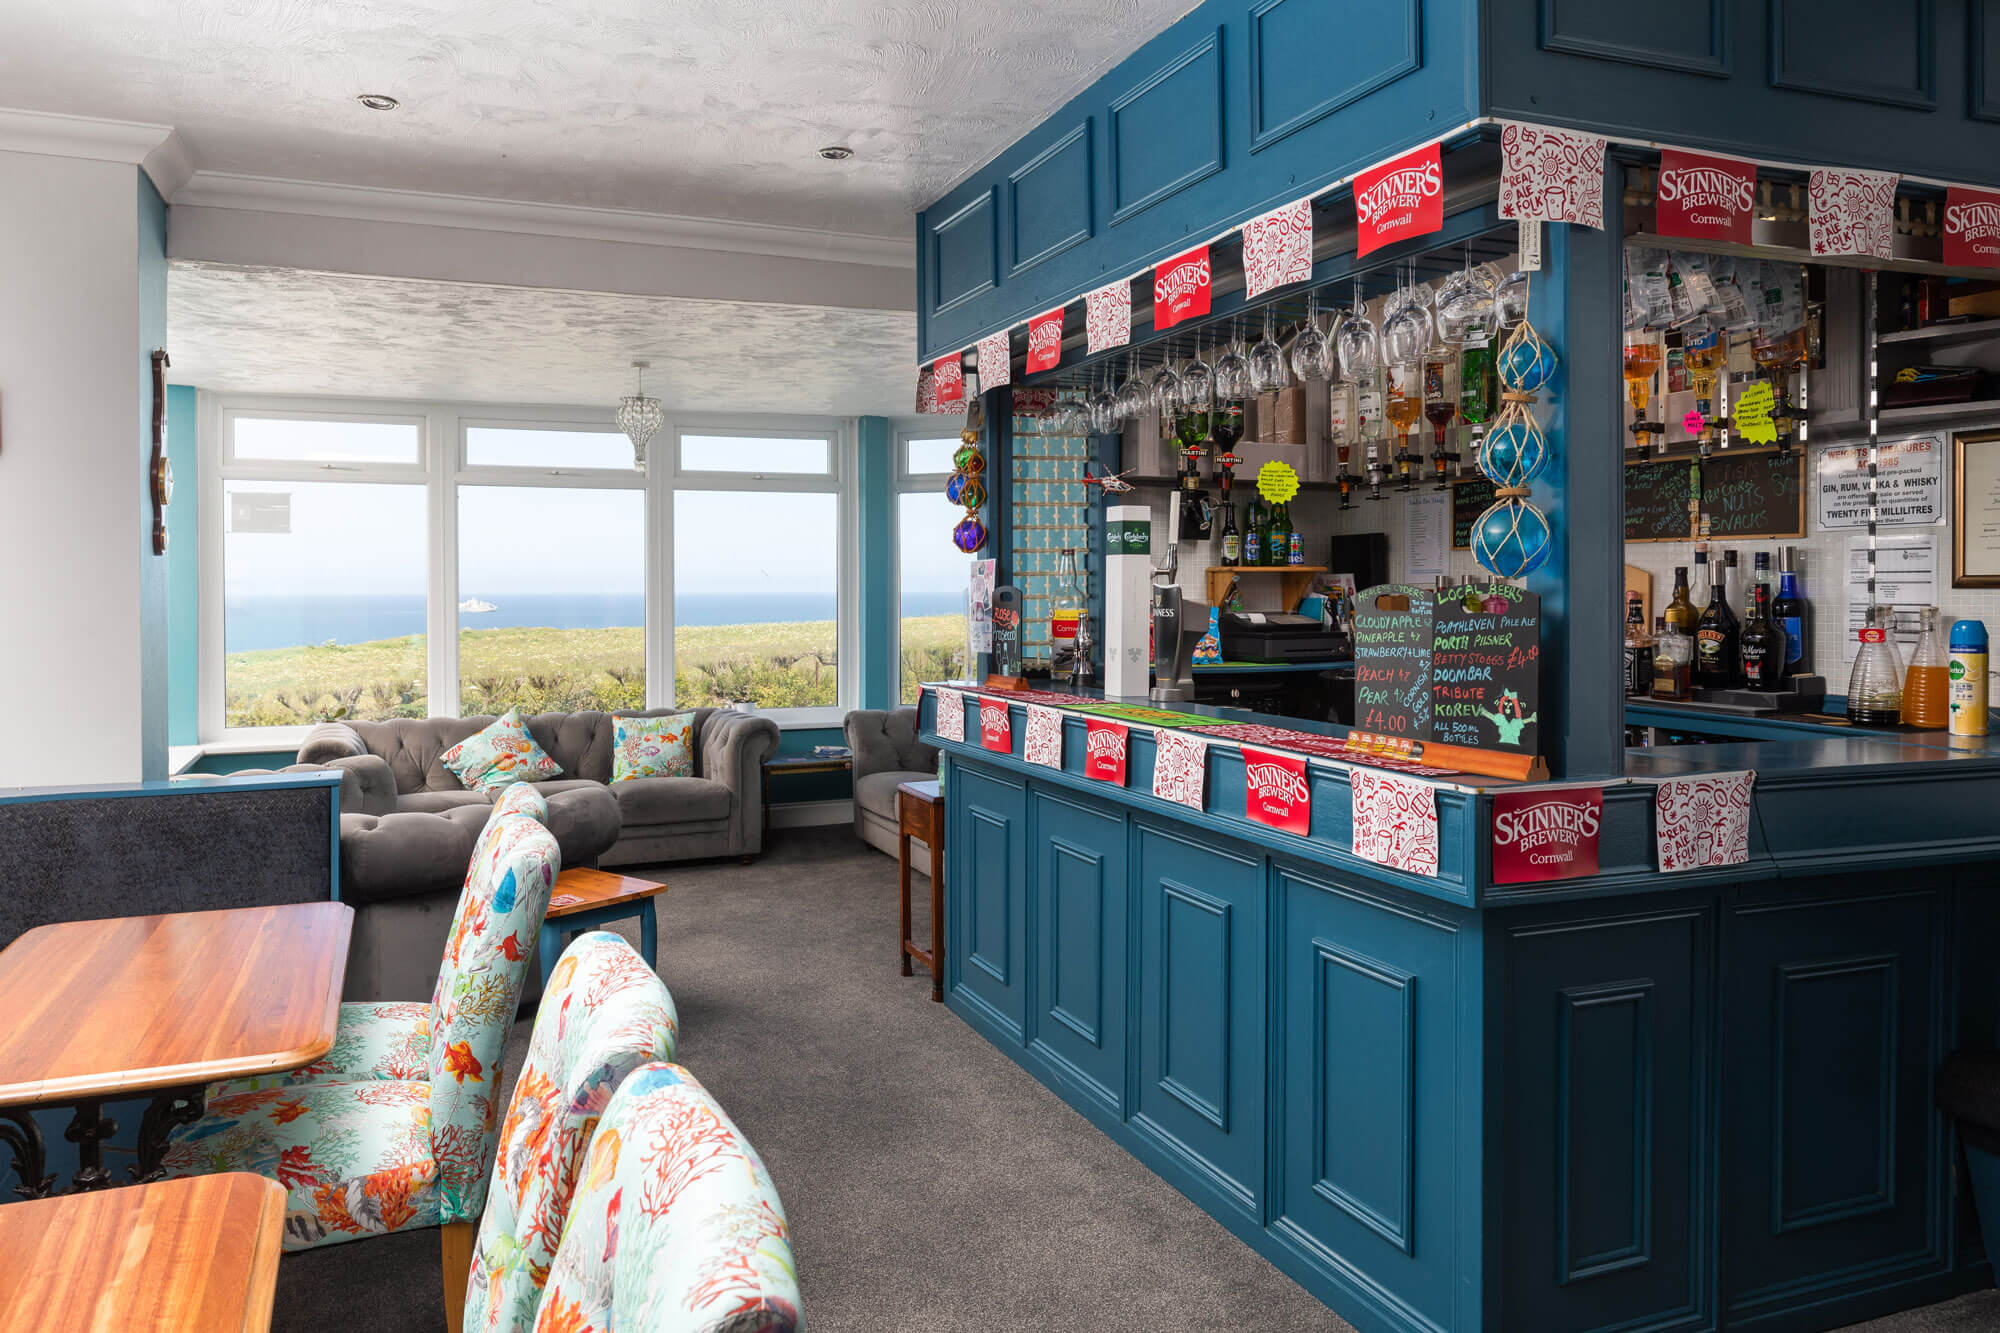 A comfy bar area with views over the ocean